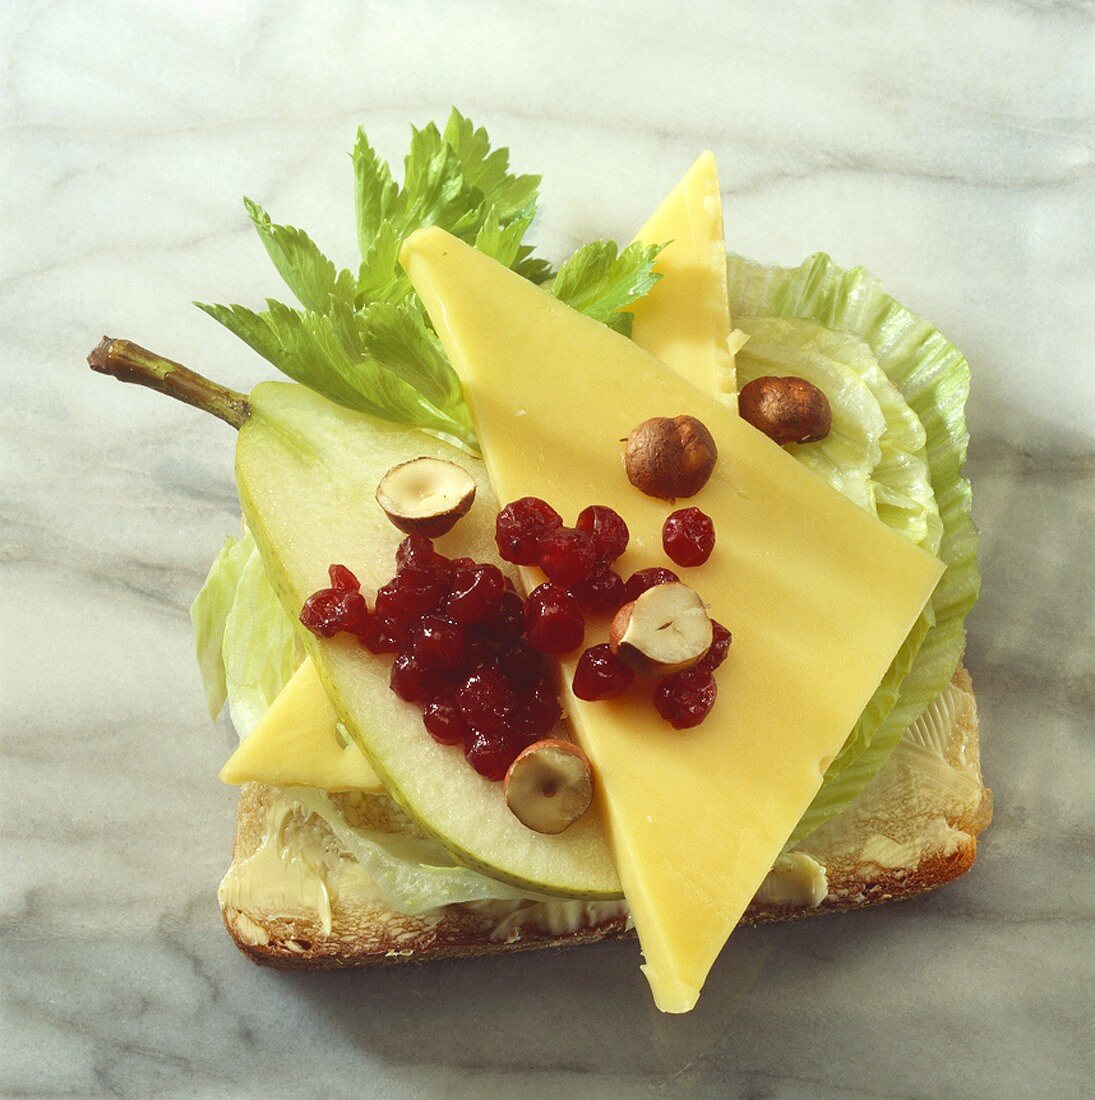 Gouda, pear and cranberries on bread